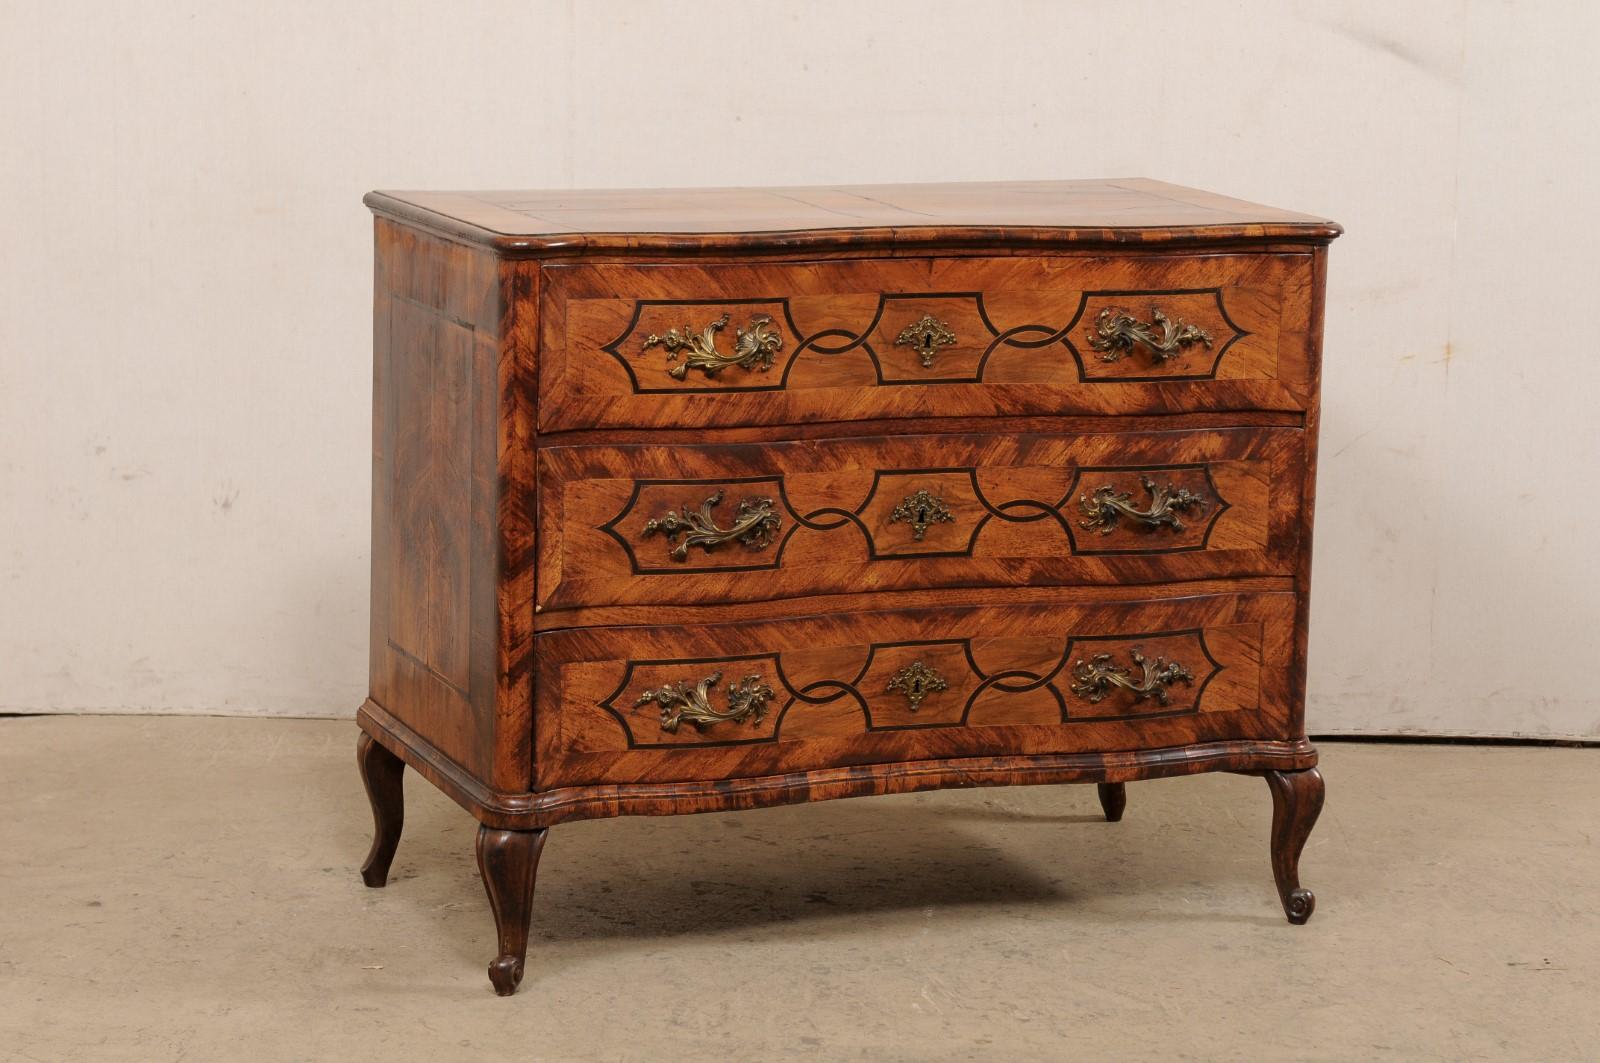 An Italian late Rococo style chest of drawers with serpentine form and book-match veneers, circa 1780. This 18th century chest from Italy features a shapely serpentine top and body, adorn in book-match veneers and inlay throughout, and presently on